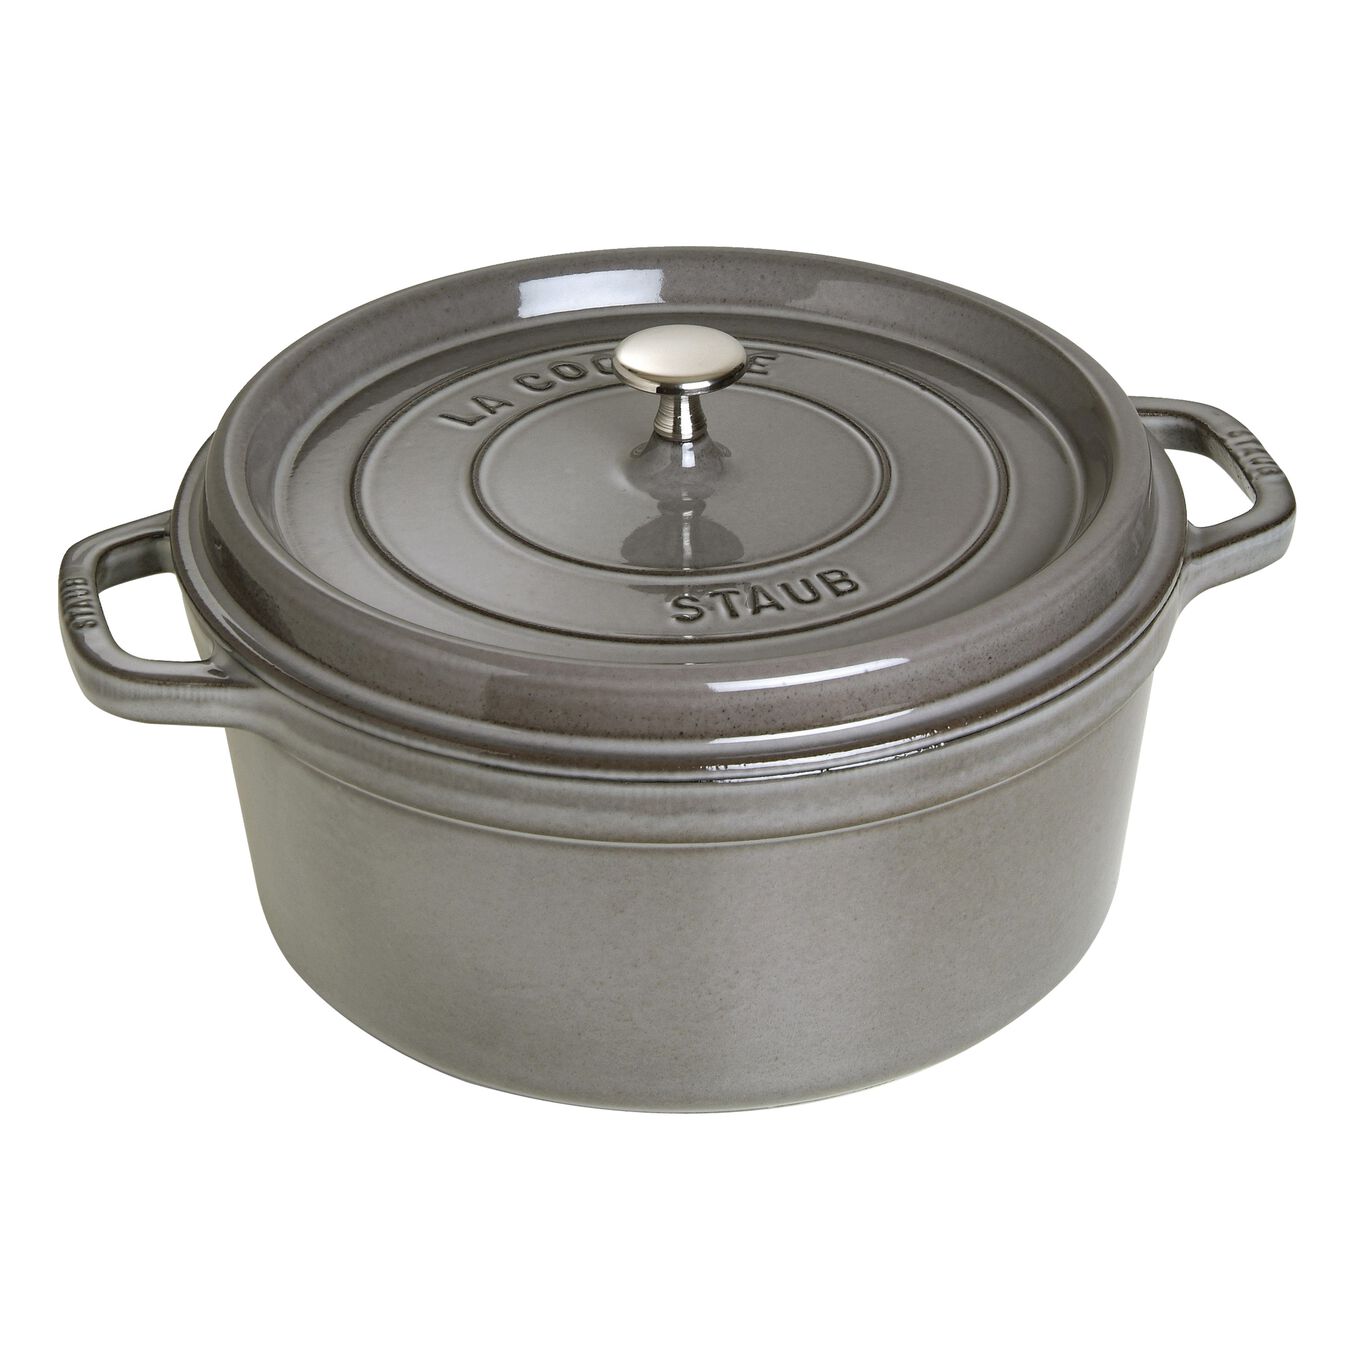 6.75 l cast iron round Cocotte, graphite-grey - Visual Imperfections,,large 1